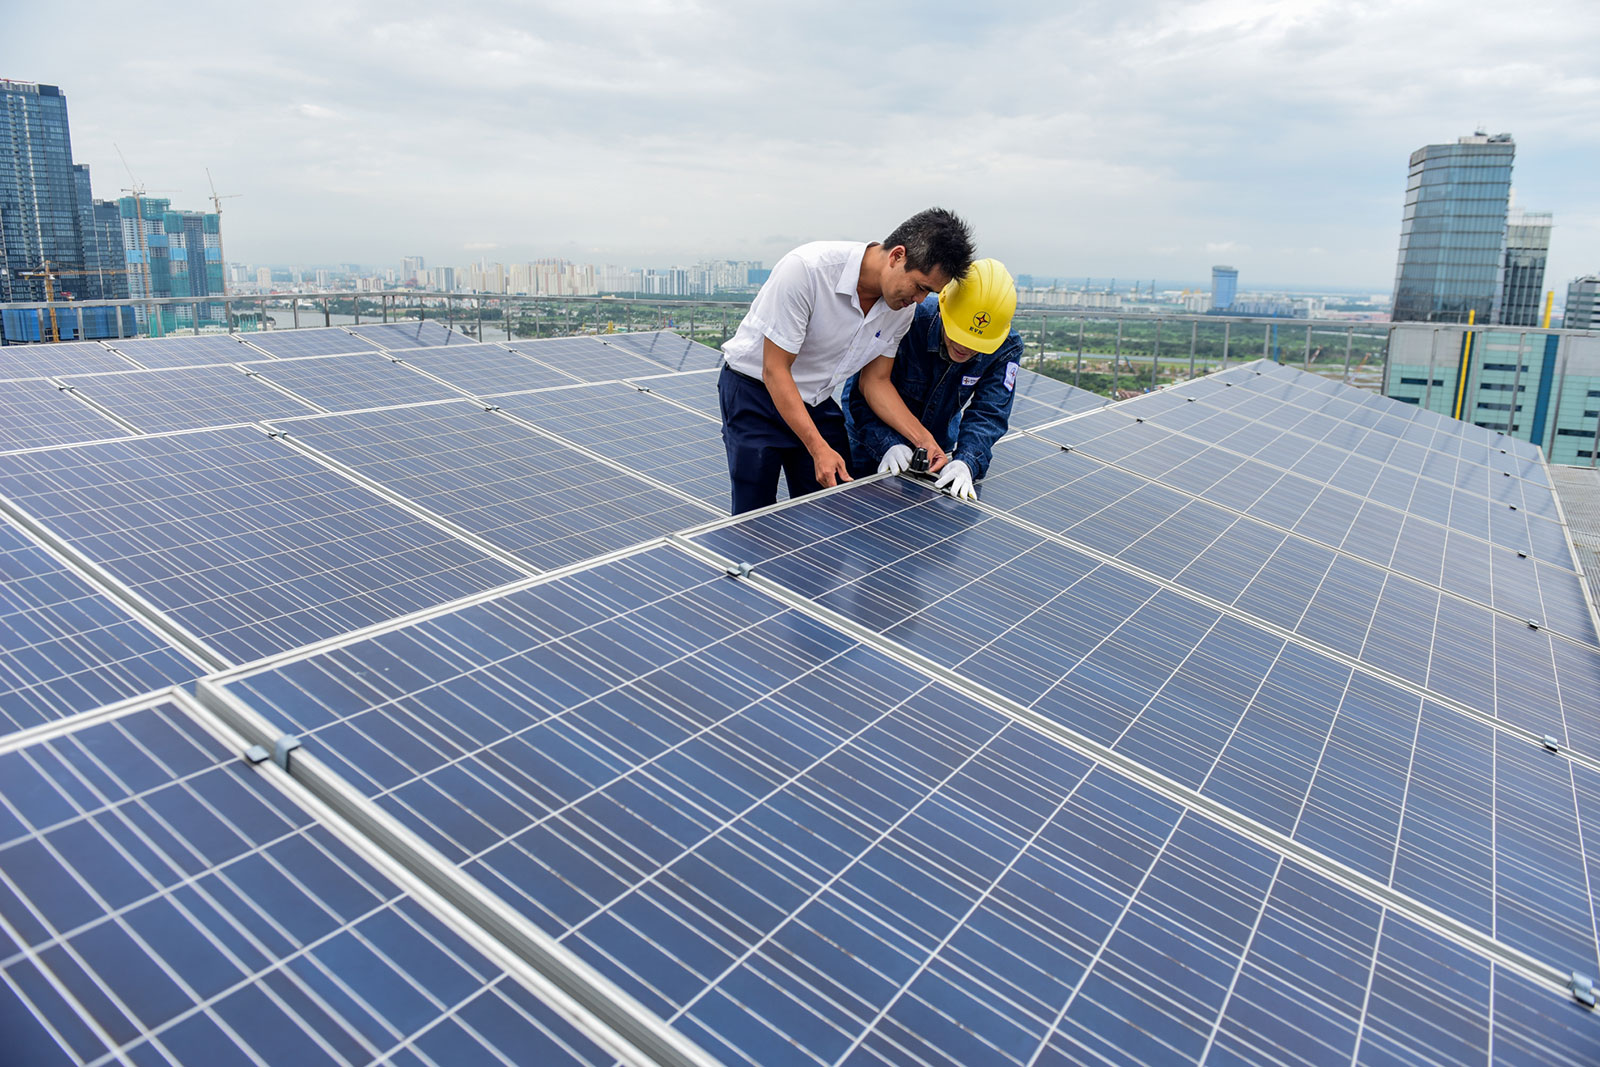 4E Promotion of Rooftop Solar in HCMC. Copyright: GIZ Viet Nam